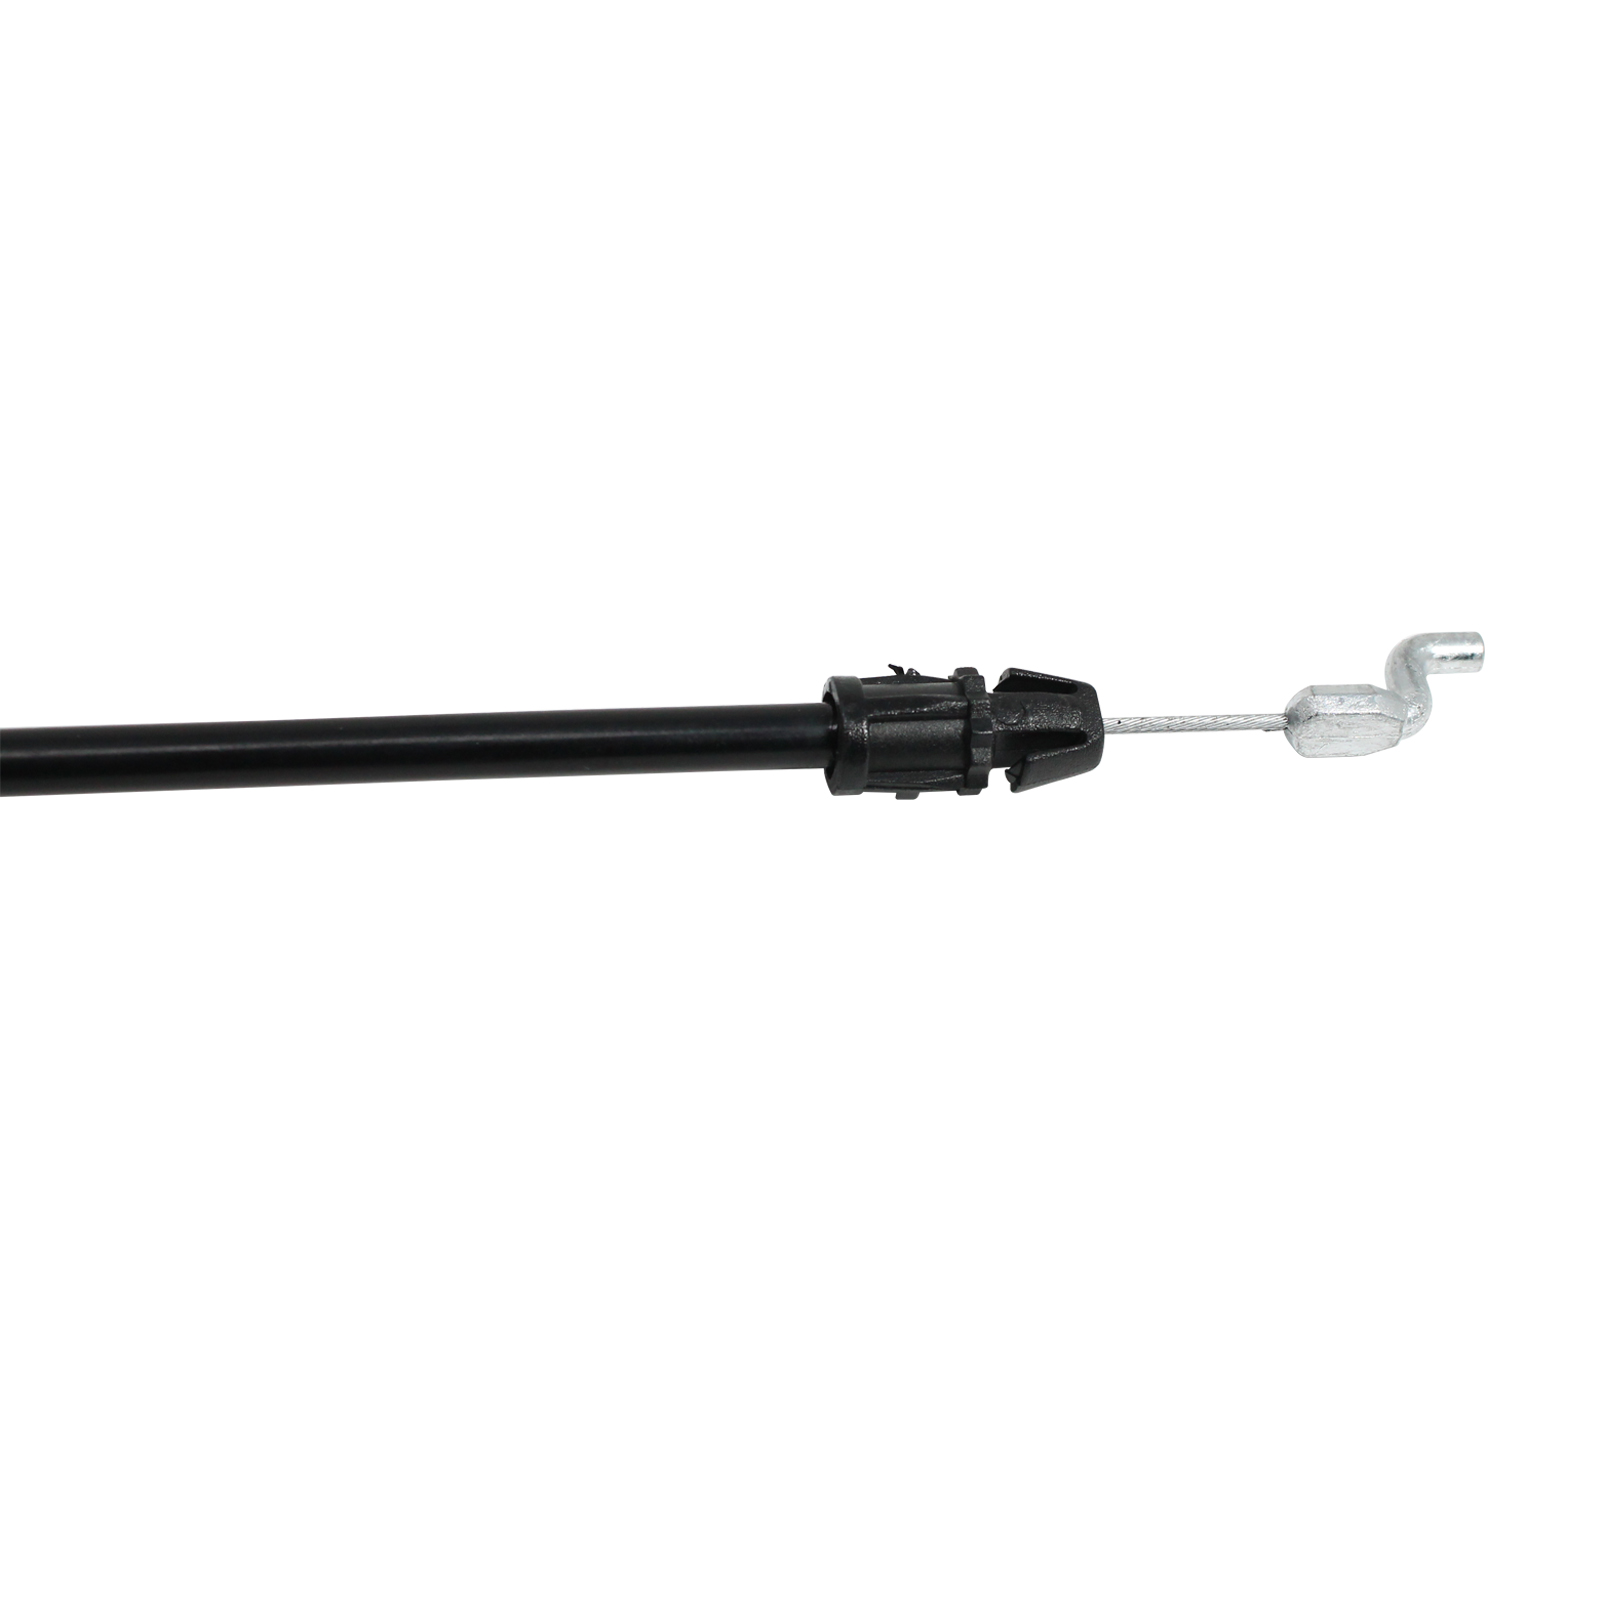 532176556 Engine Cable Replacement for Husqvarna ROTARY LAWN MOWER (96114000702) (2007-03) Lawn Mower: Consumer Walk Behind - Compatible with 176556 162778 Zone Control Cable - image 3 of 4